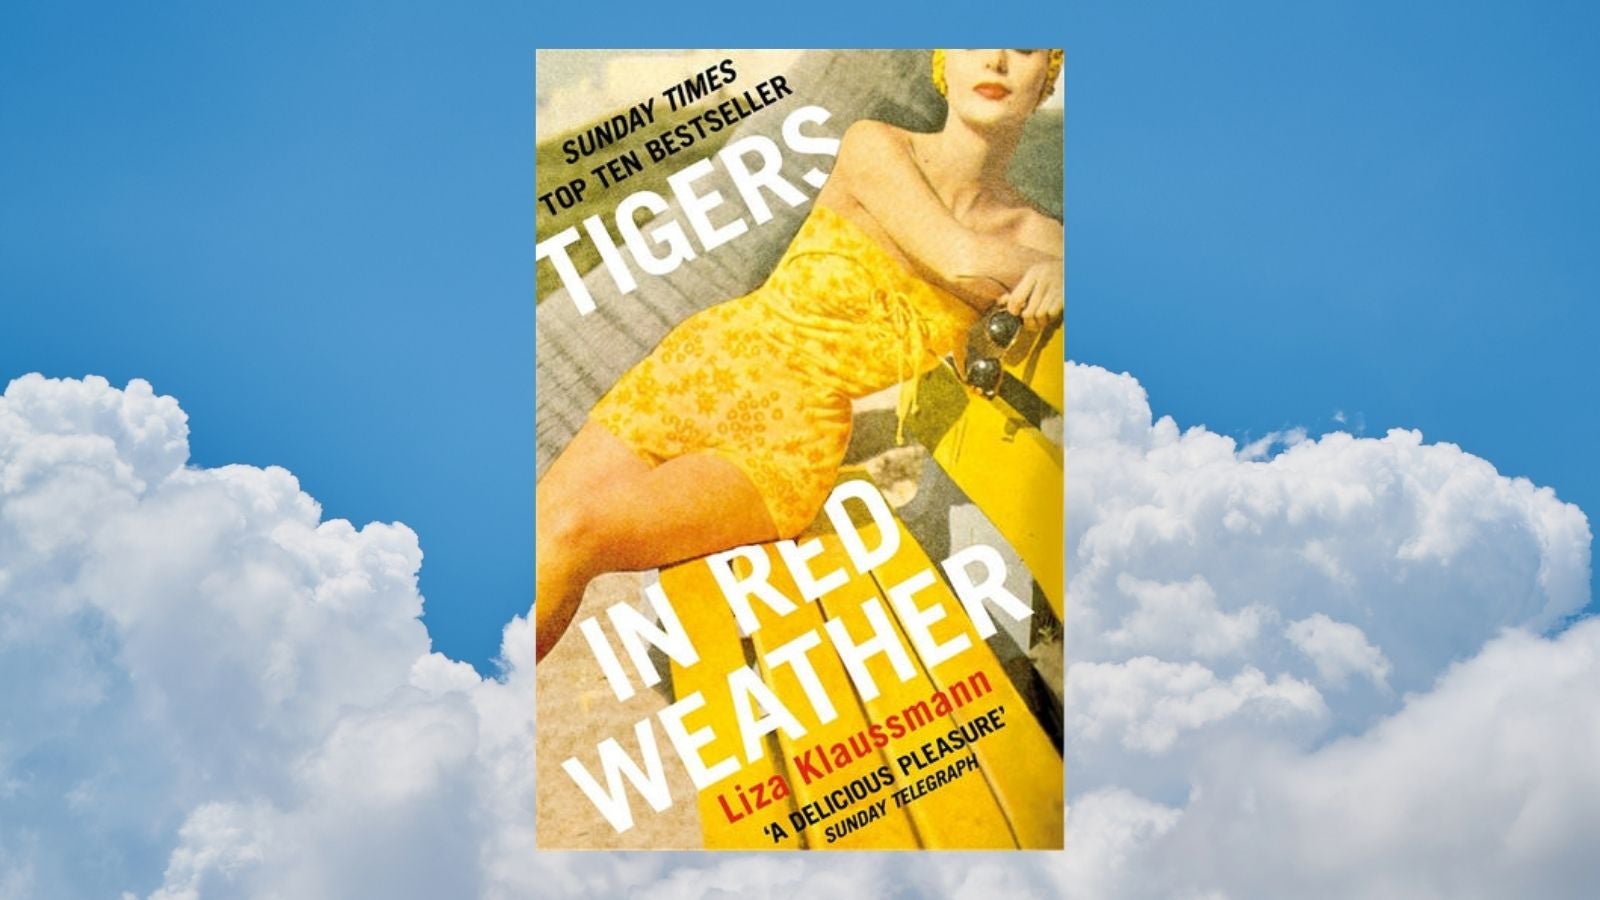 Tigers in Red Weather book cover with blue cloud background